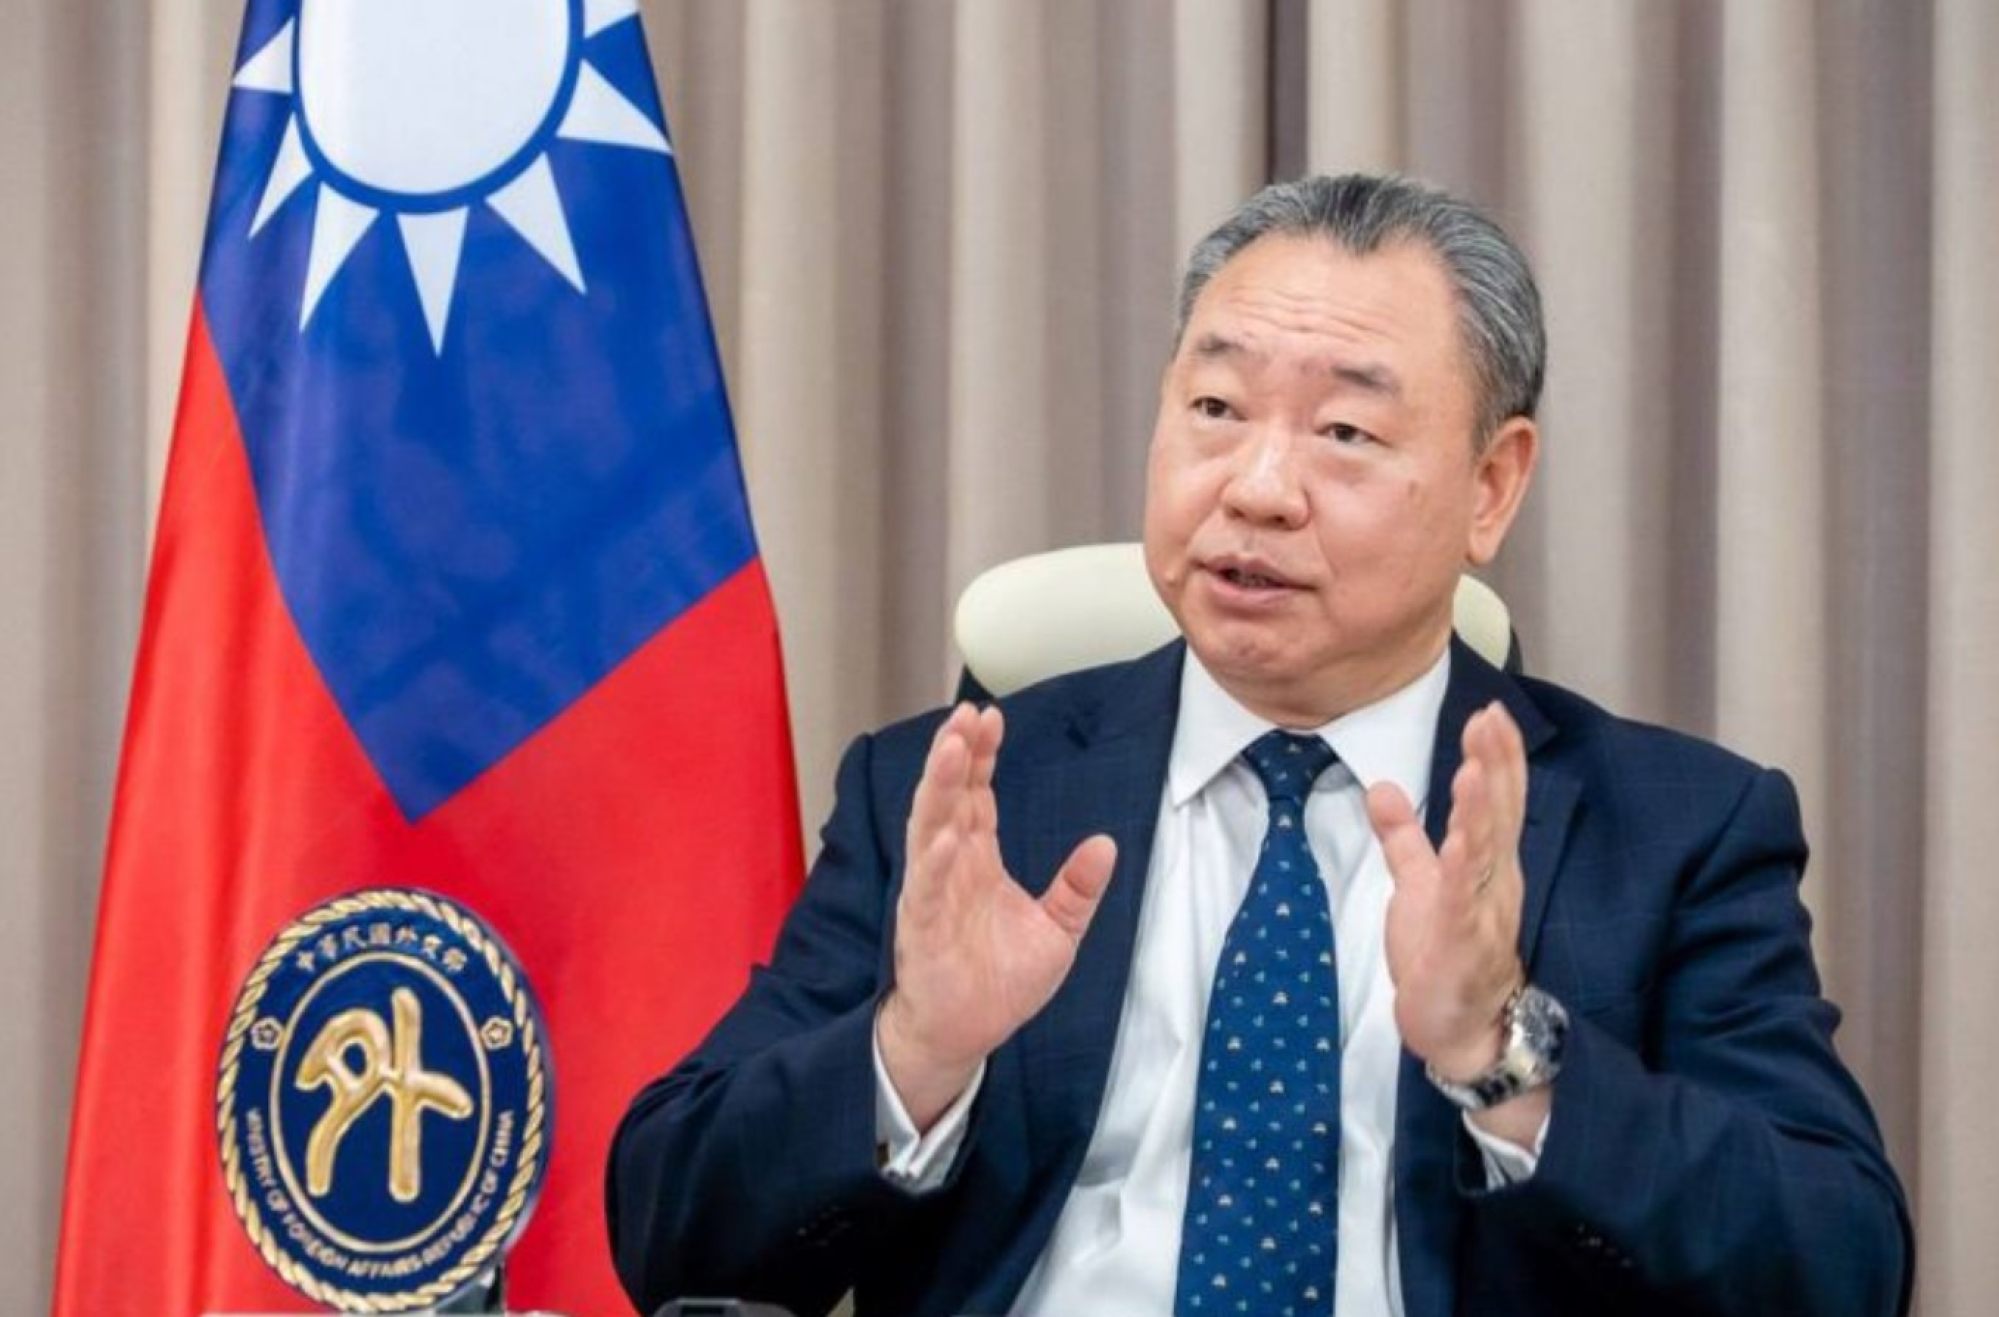 Alexander Tah-ray Yui is the top official at the Taipei Economic and Cultural Representative Office in Washington. Photo: Taiwan Ministry of Foreign Affairs